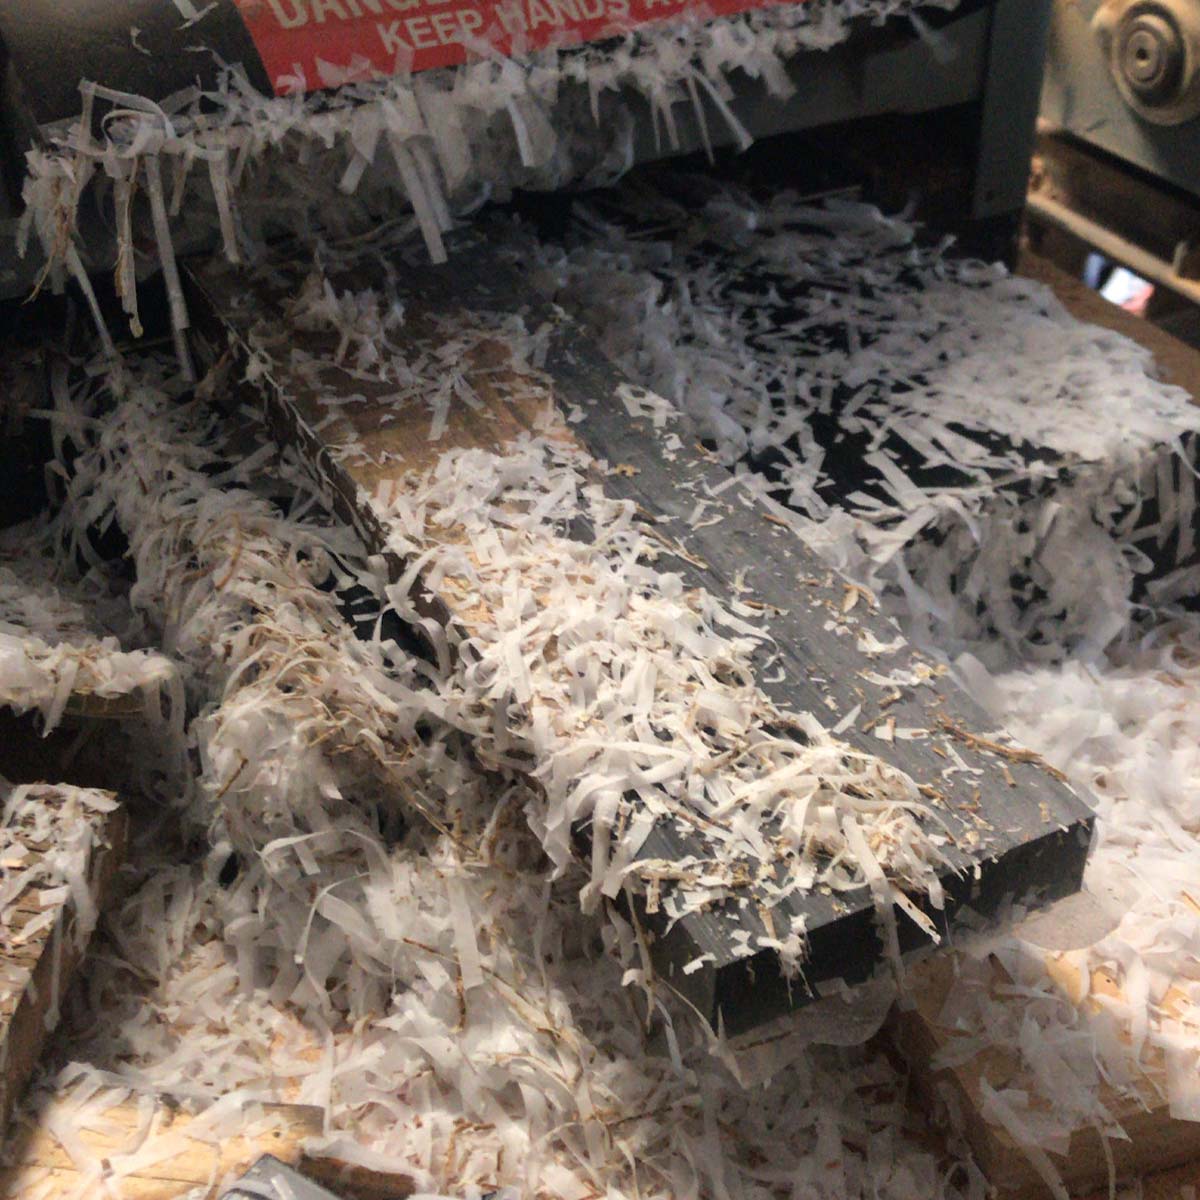 plastic epoxy resin shavings on a planer after running a magnetic knife holder through it